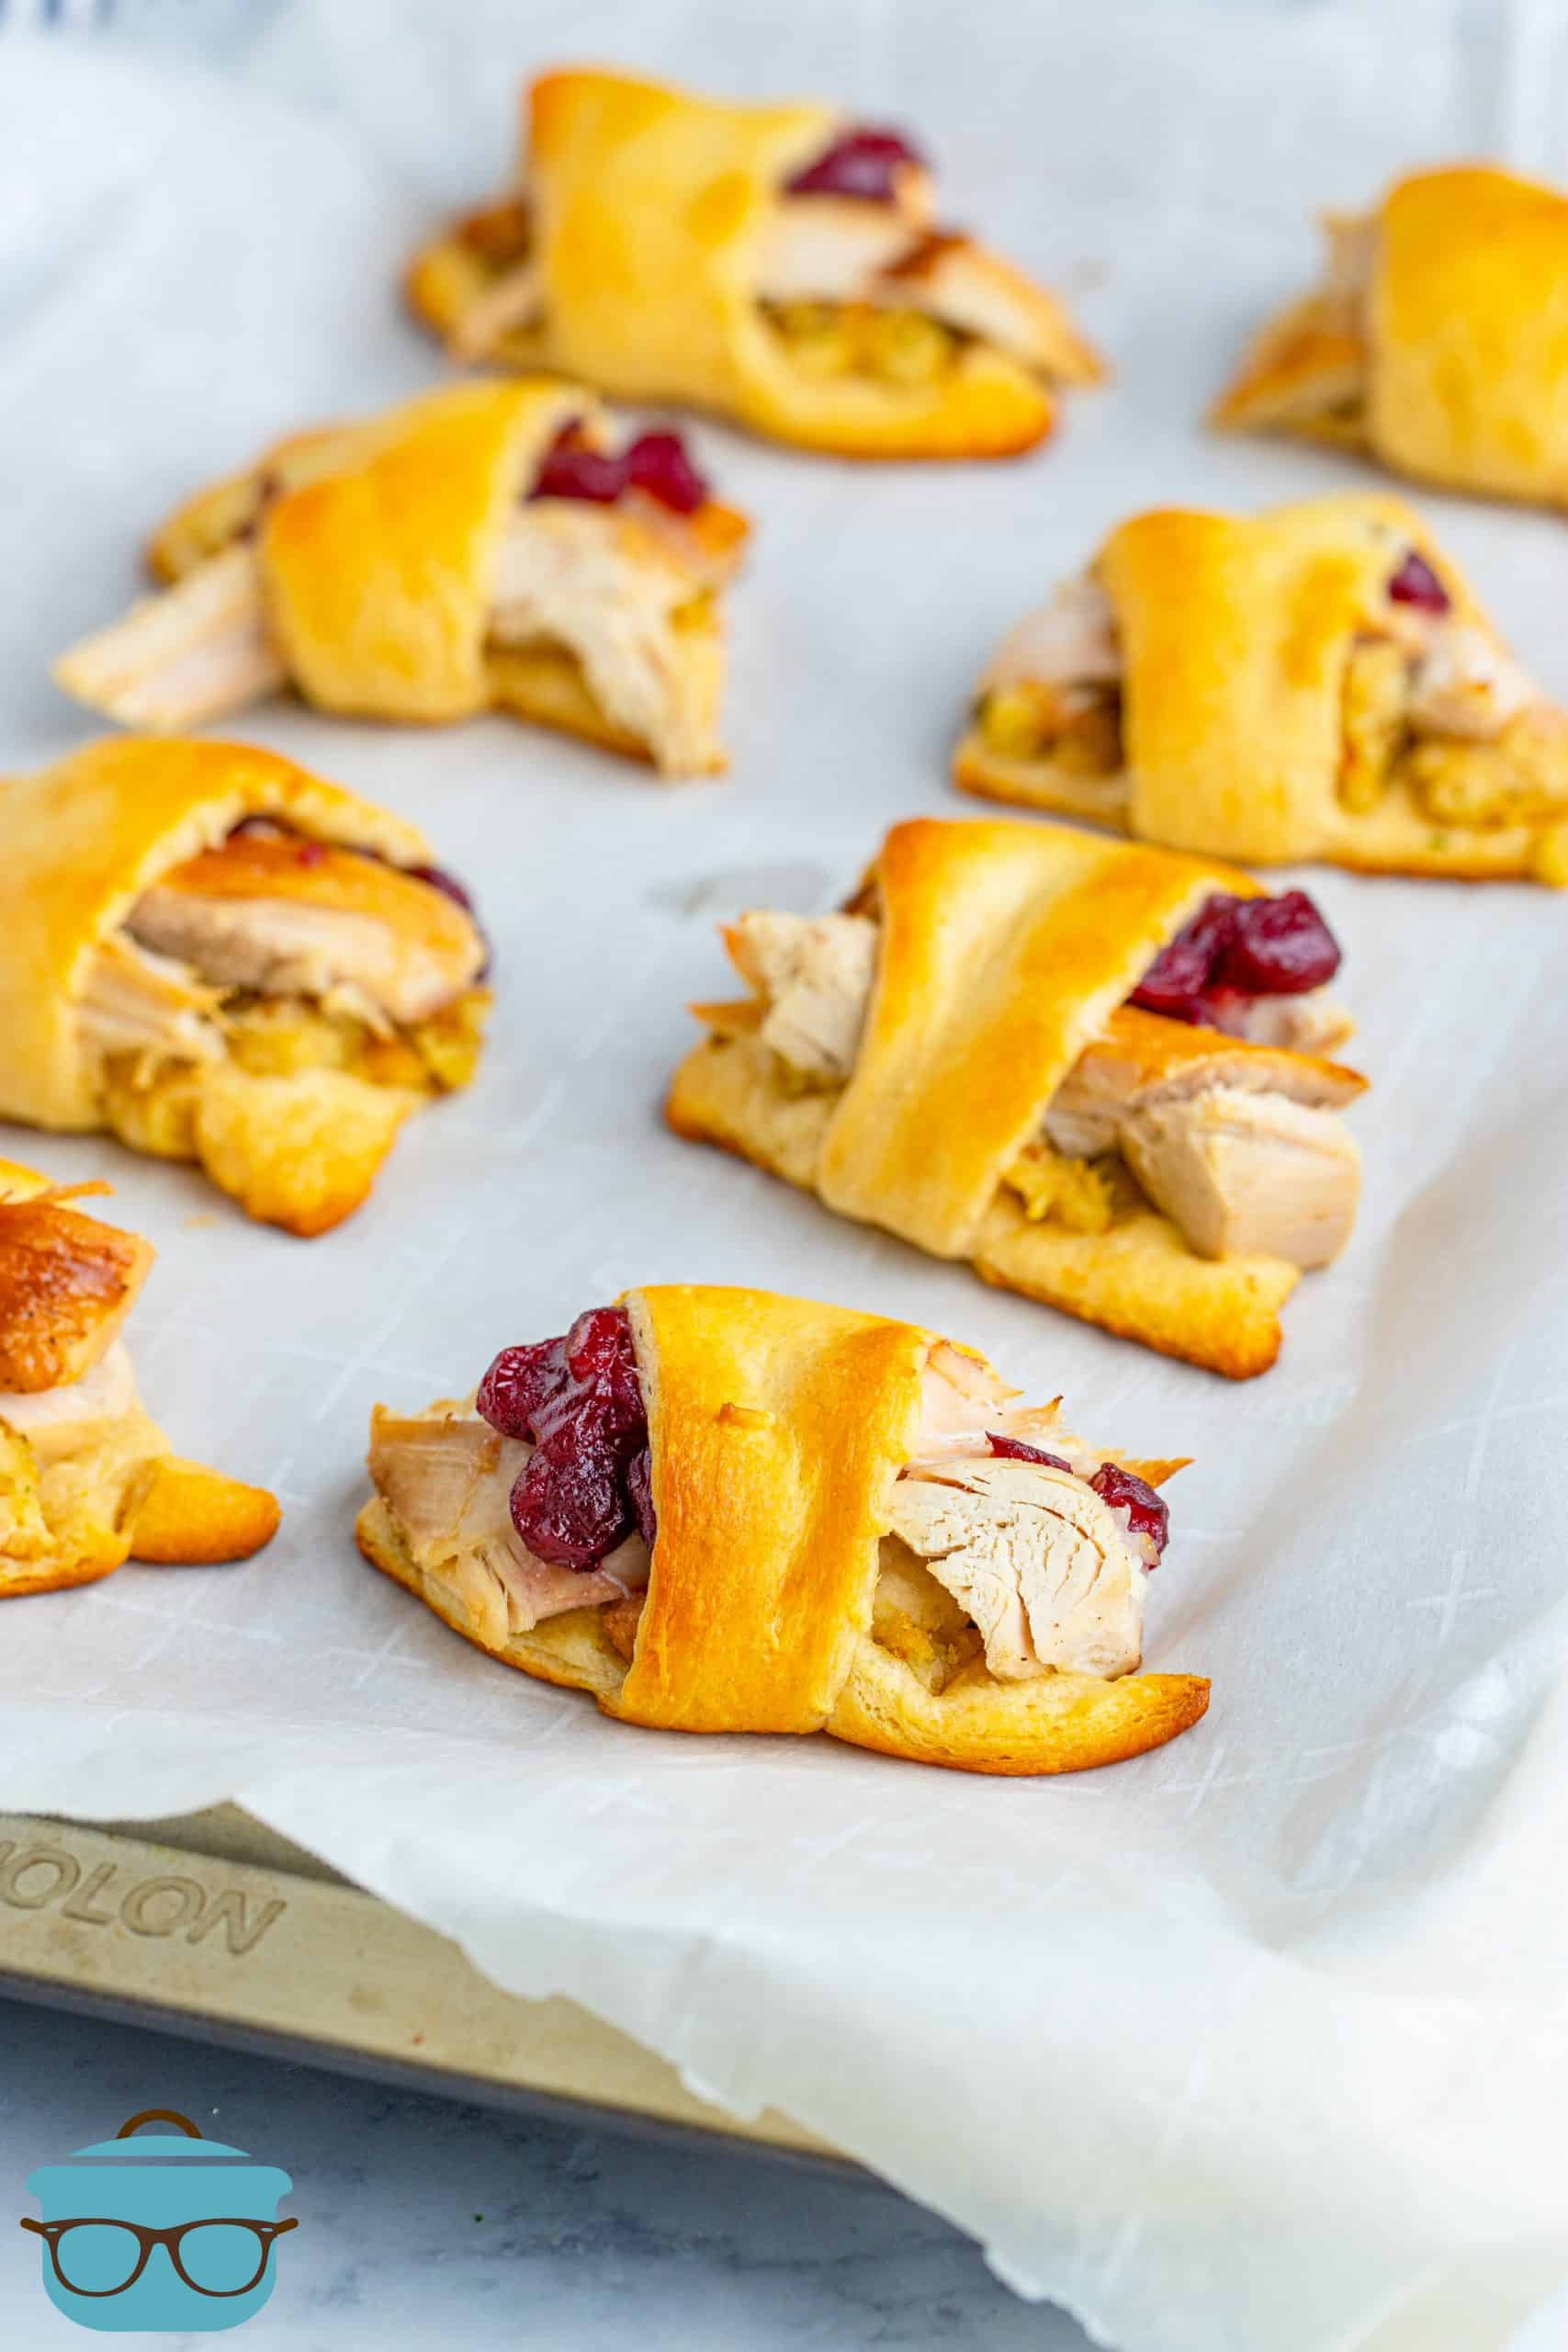 Leftover Turkey Crescent Roll Ups shown fully baked on parchment paper.